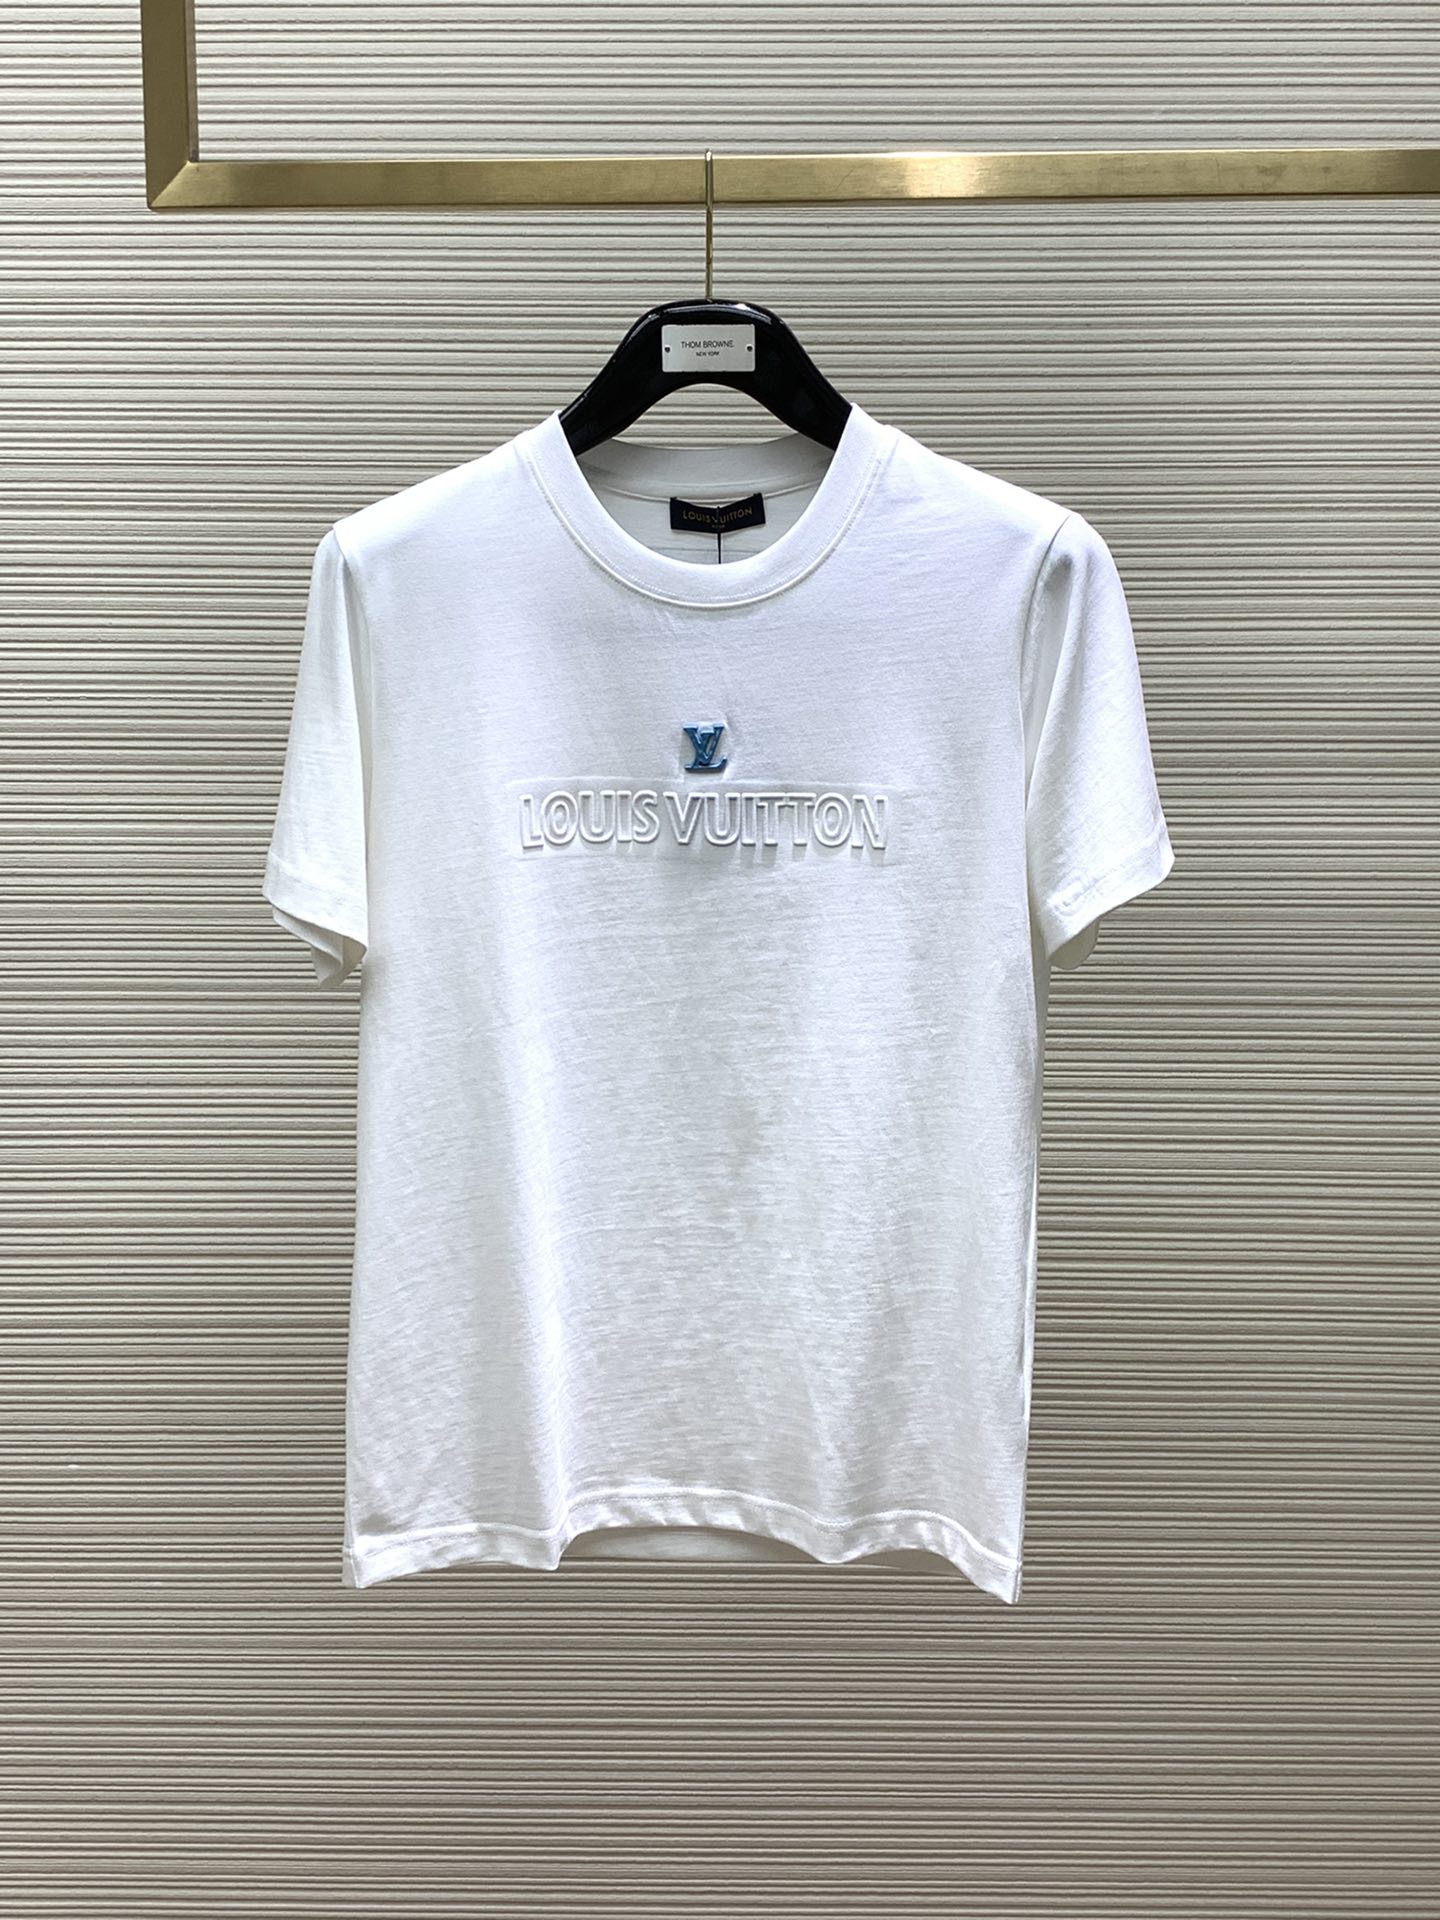 Louis Vuitton Buy Clothing T-Shirt Summer Collection Fashion Short Sleeve